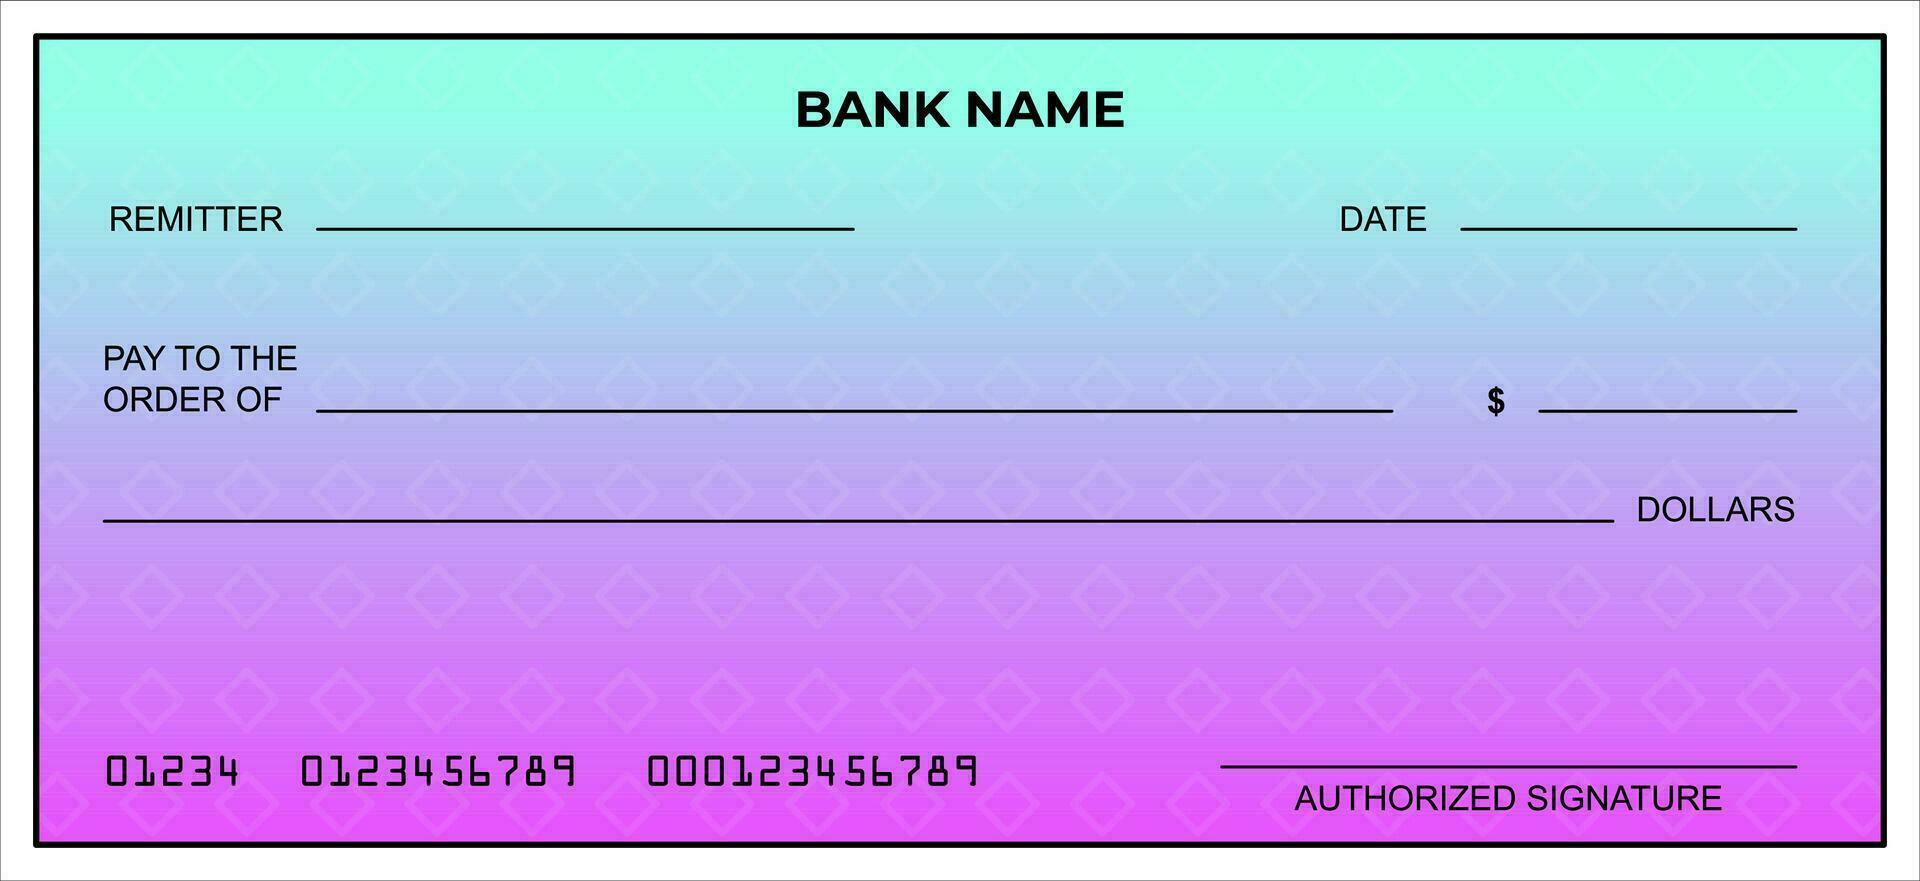 Vector of Blank Bank or Personal Check. Payment, Money, Cash, Currency, Cheque, Banknote